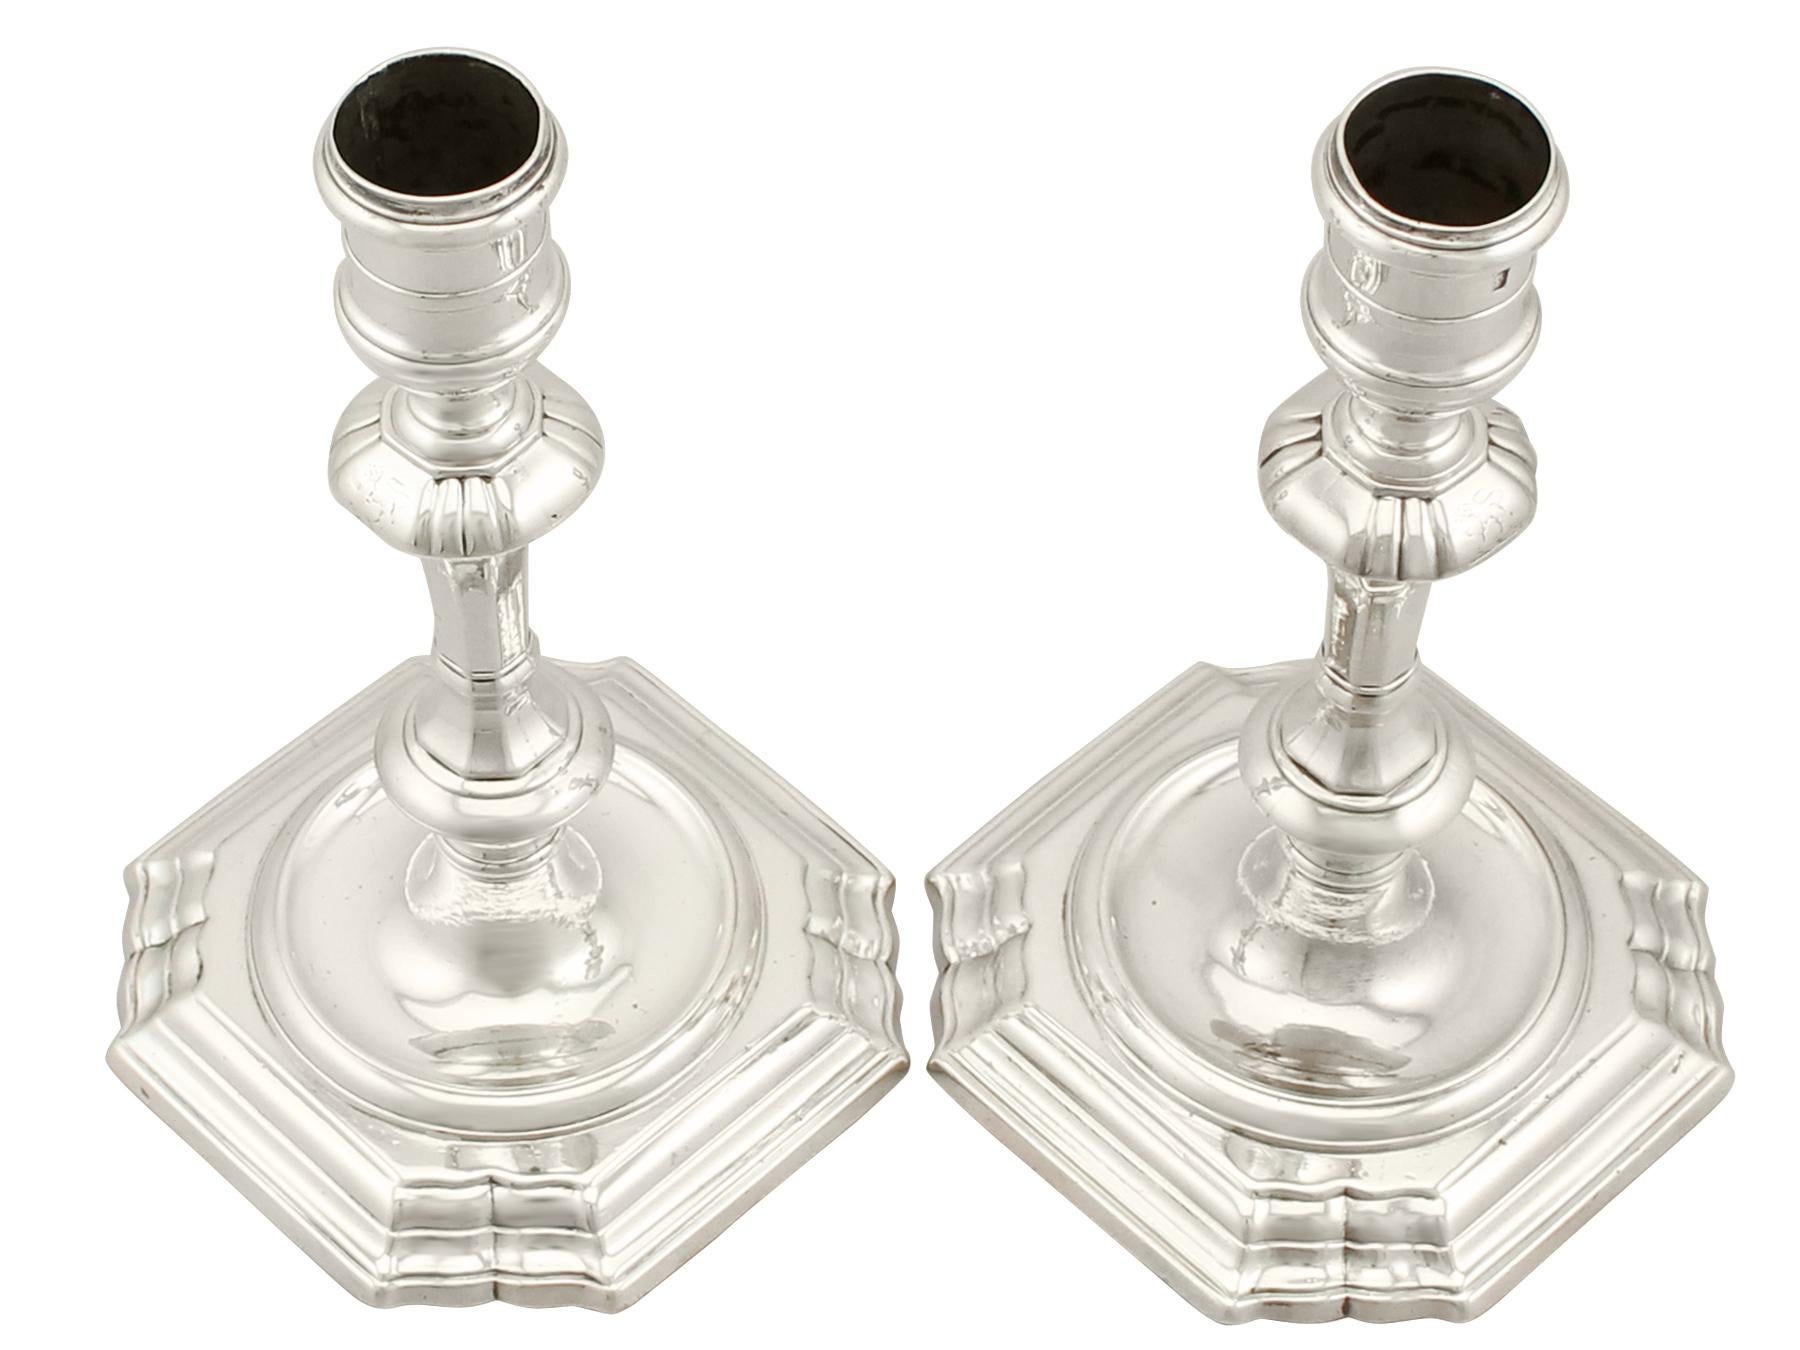 An exceptional, fine and impressive pair of antique George II English cast sterling silver candlesticks; an addition of our ornamental Georgian silverware collection

These exceptional antique George II cast sterling silver candlesticks have a